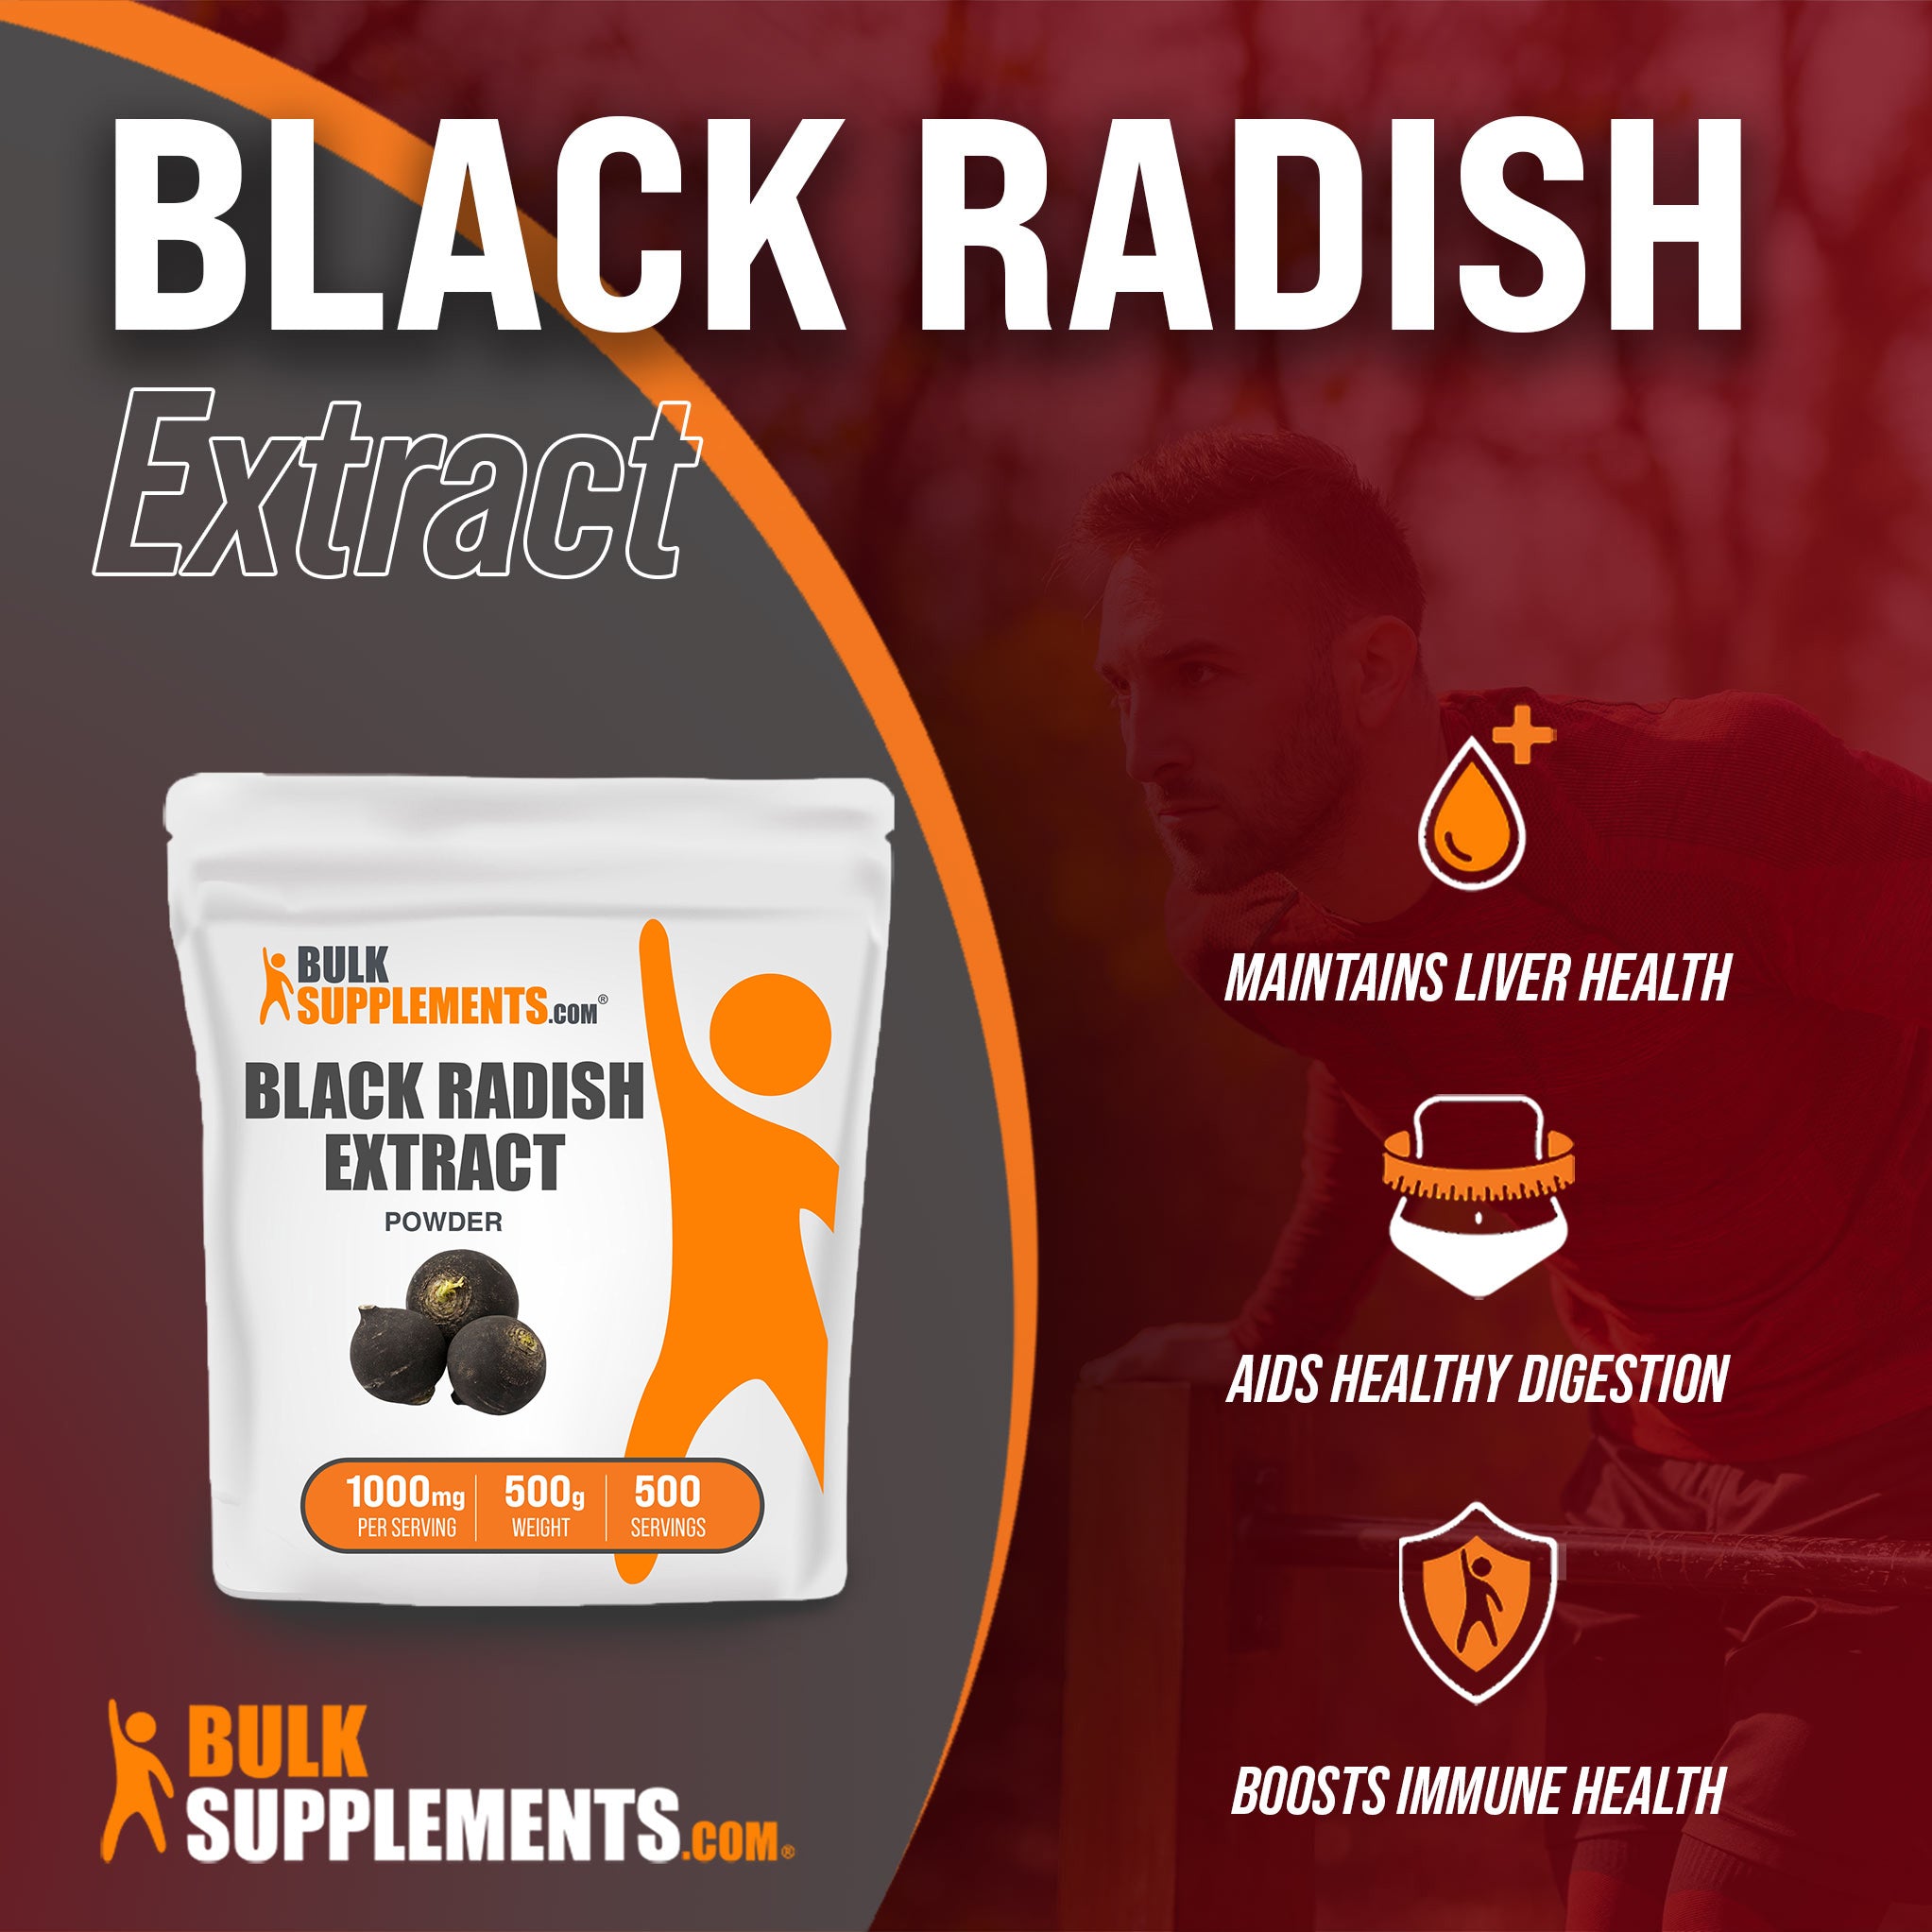 500g of Black Radish Extract is an ideal liver supplement